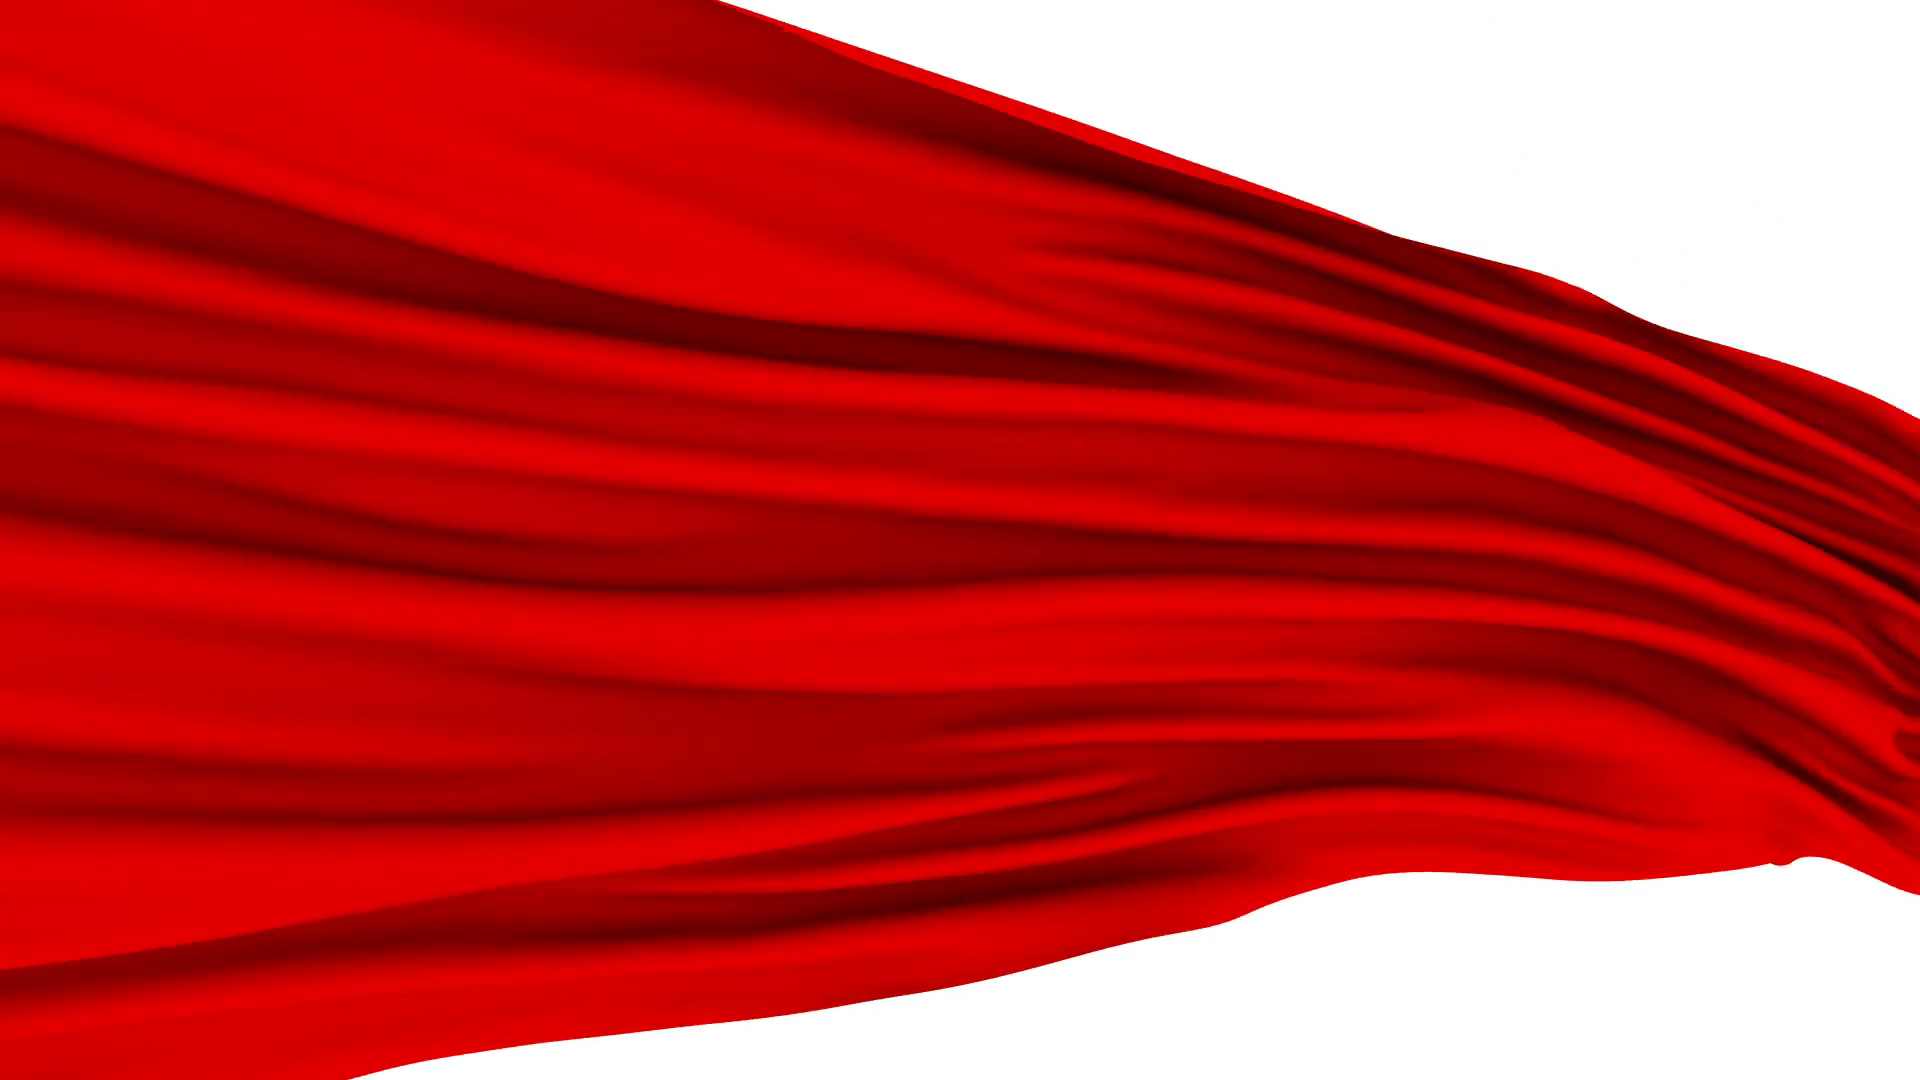 Red Cloth fluttering in the Wind. Motion Background - Videoblocks